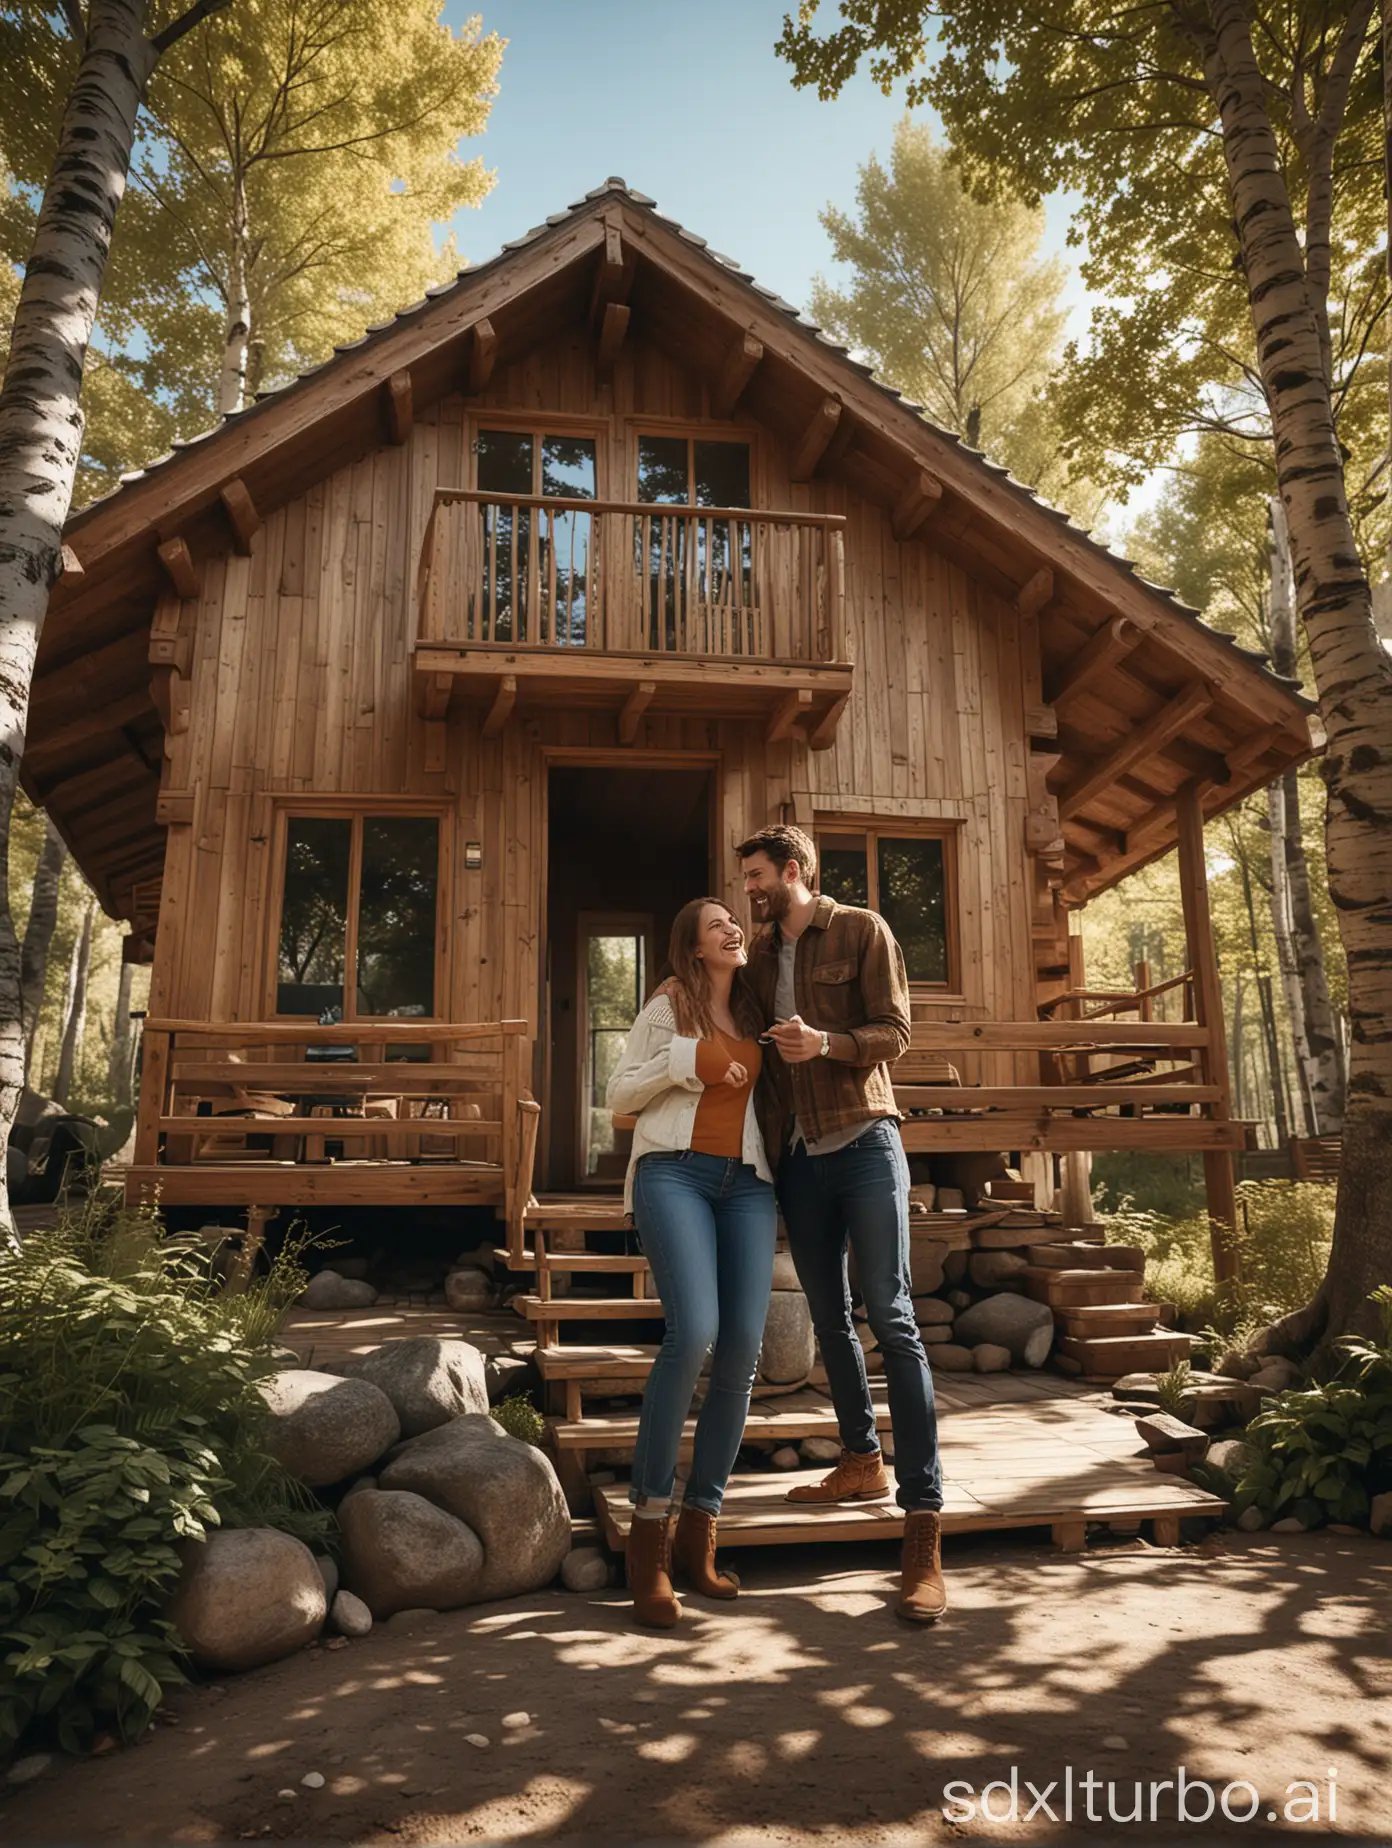 Joyful-Couple-Laughing-in-Secluded-Chalet-Low-Angle-Shot-with-Detailed-Natural-Surroundings